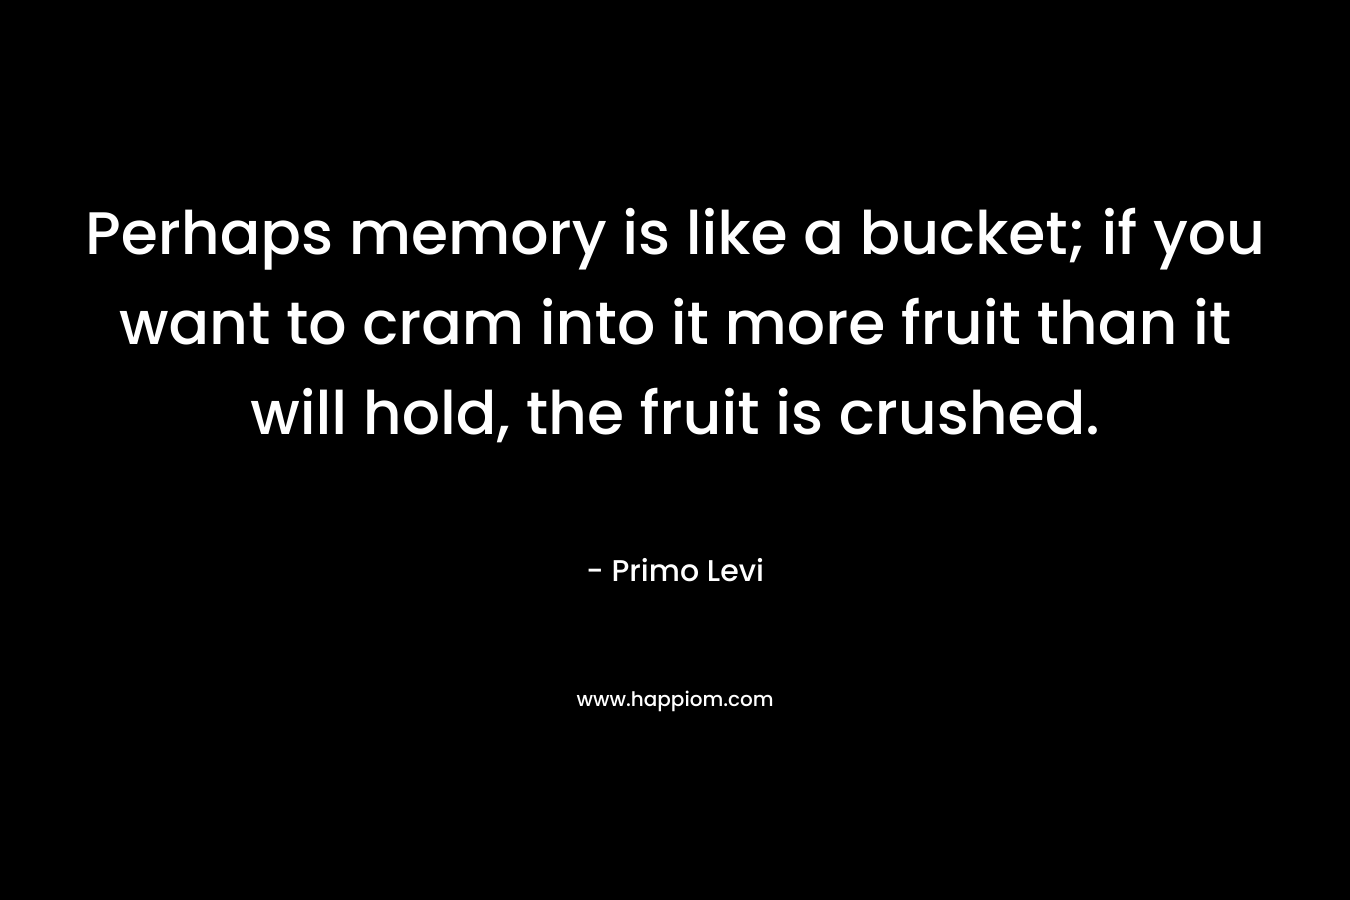 Perhaps memory is like a bucket; if you want to cram into it more fruit than it will hold, the fruit is crushed. – Primo Levi